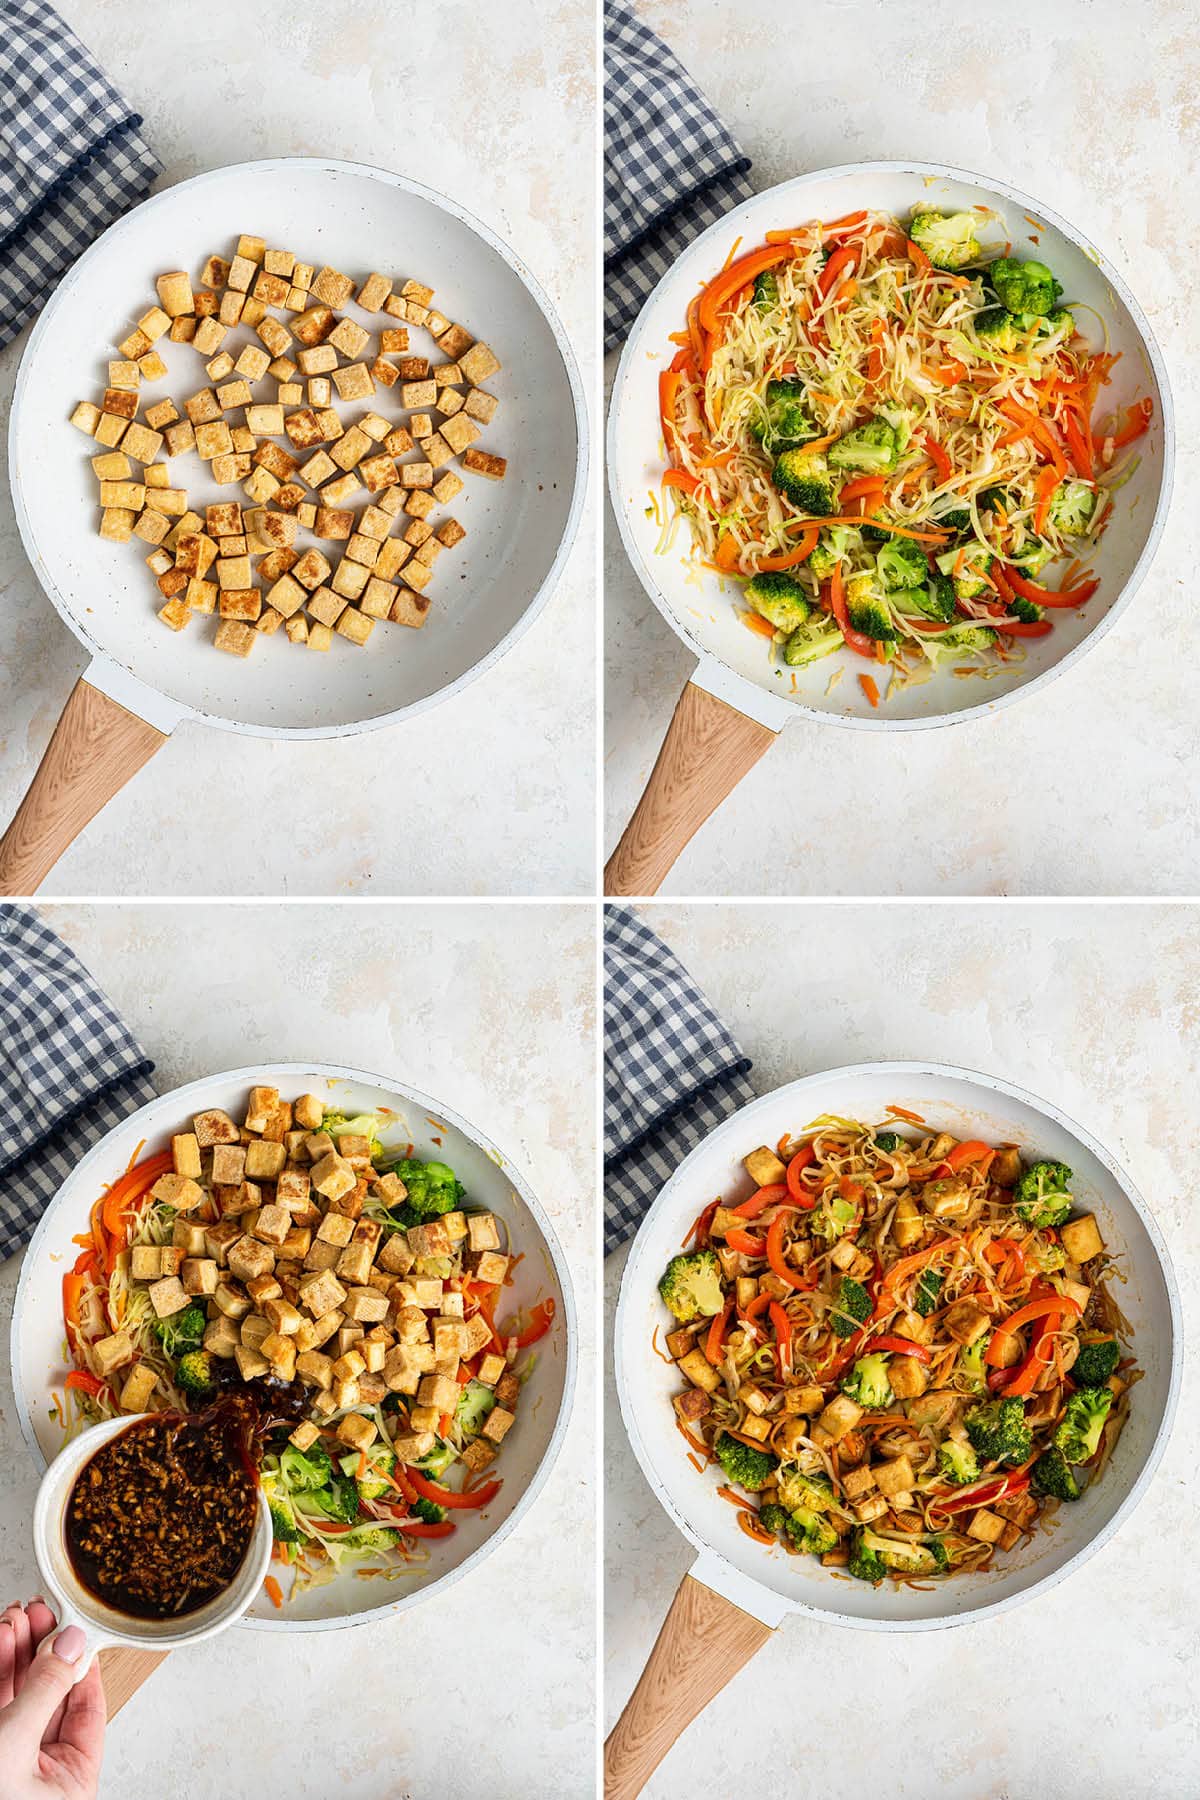 Collage of 4 photos showing the steps to make a Tofu Cabbage Noodle Bowl: cooking tofu in a skillet, then cooking the veggies, and finally cooking the veggies and tofu all together with the sauce.